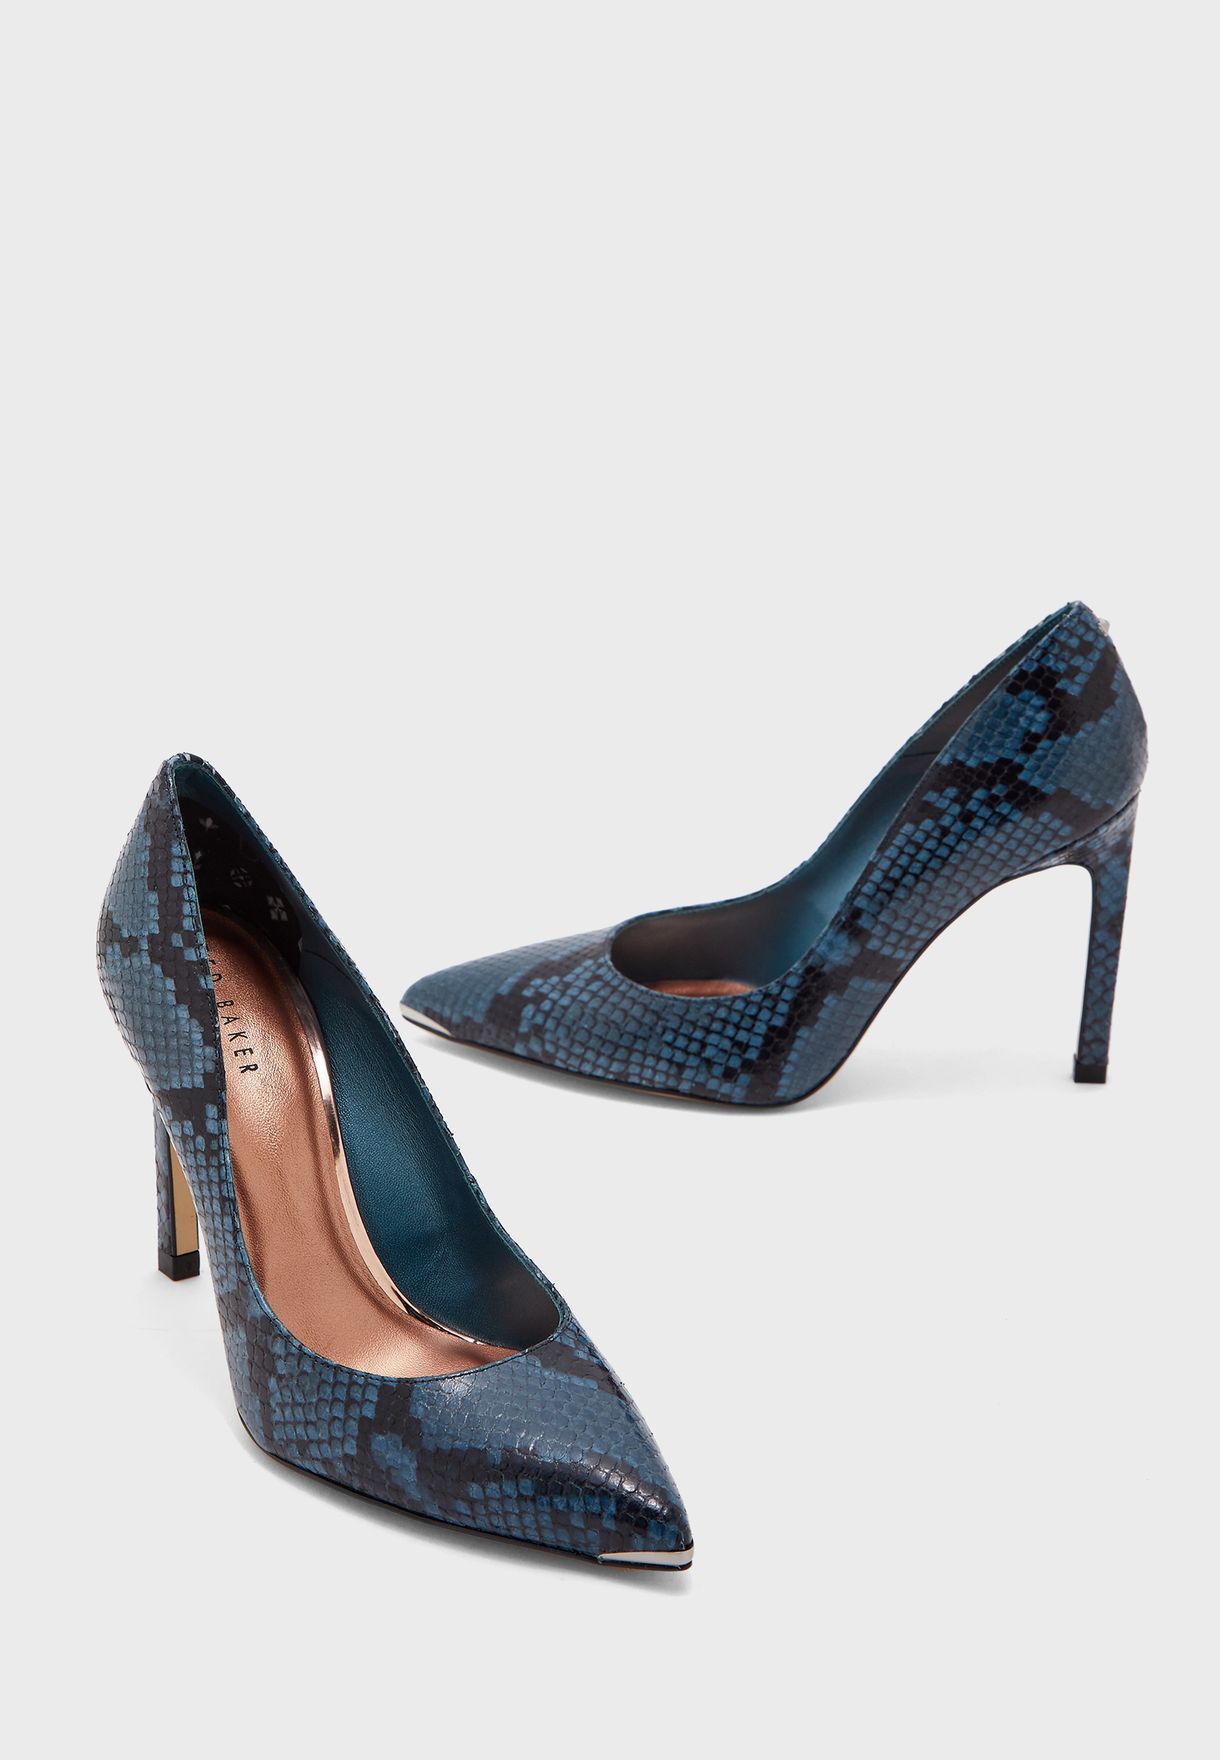 ted baker blue court shoes